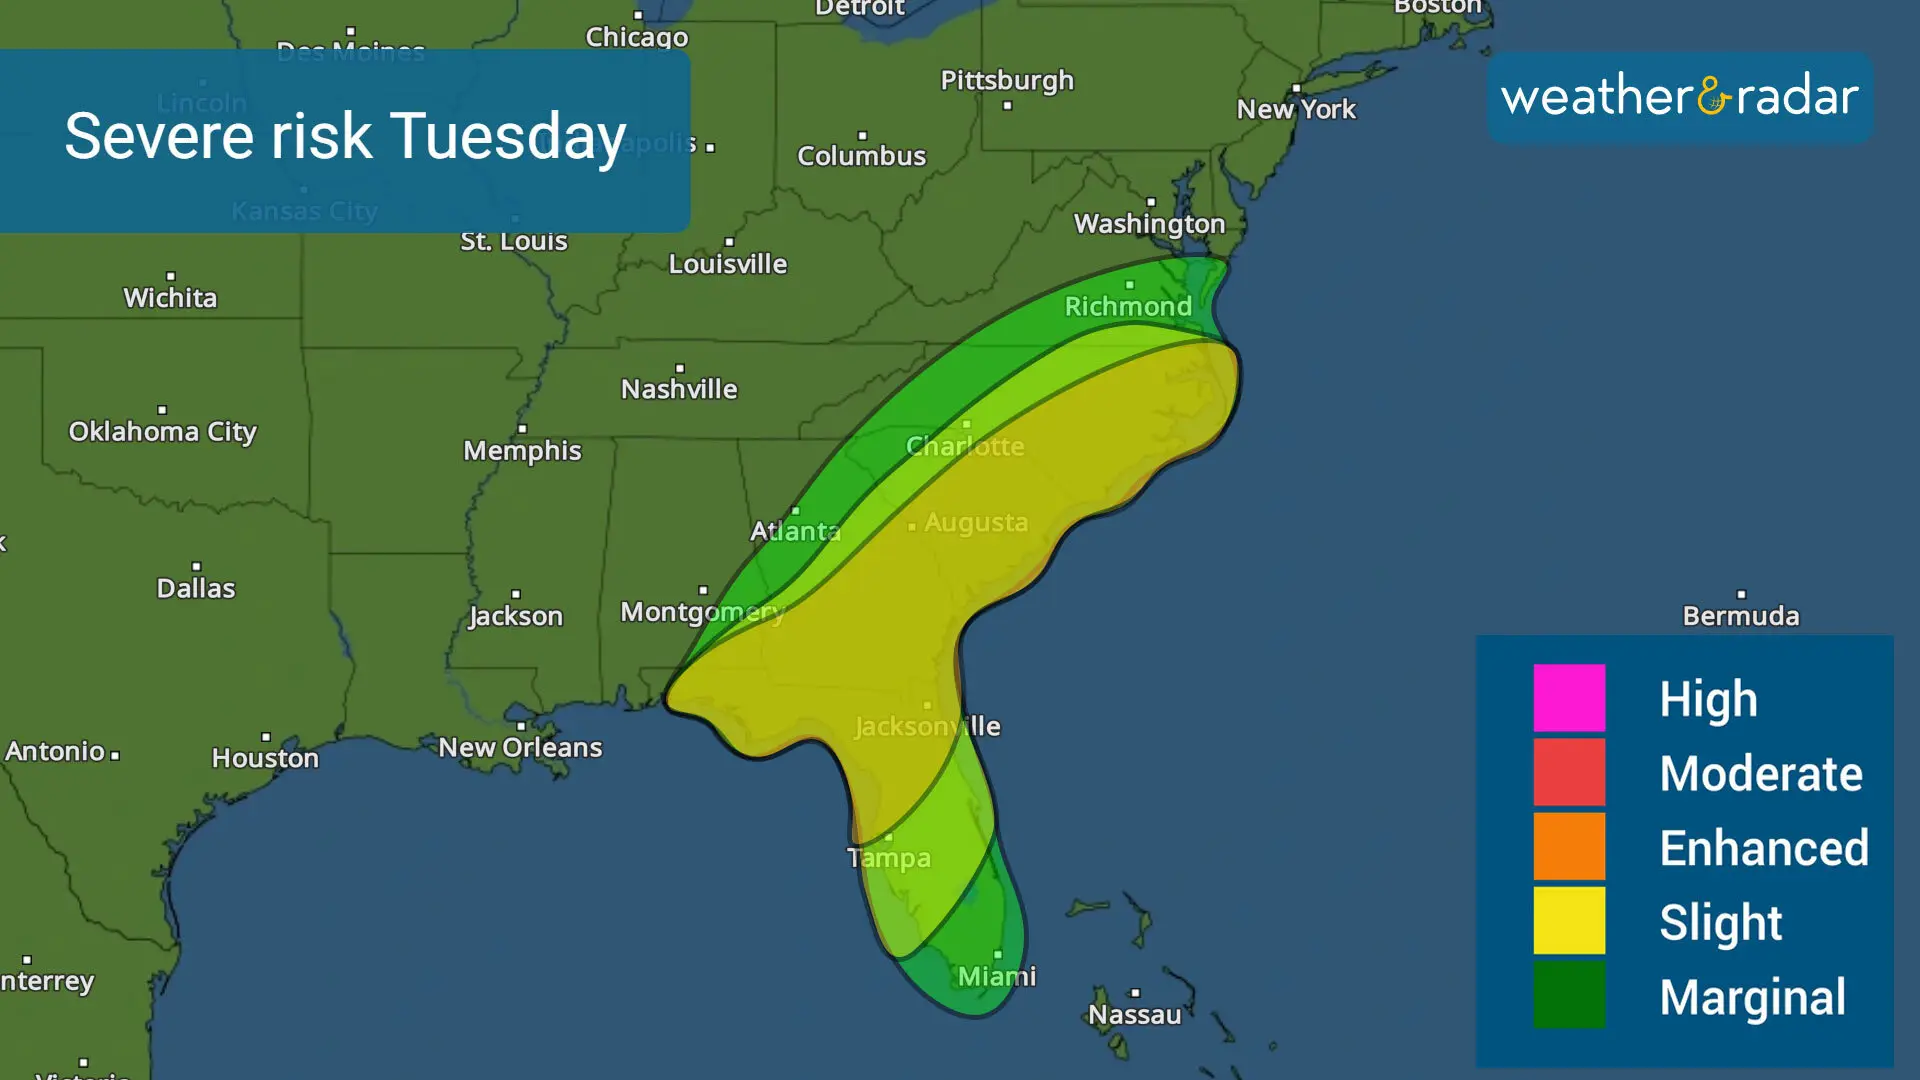 Severe weather risk for Tuesday.